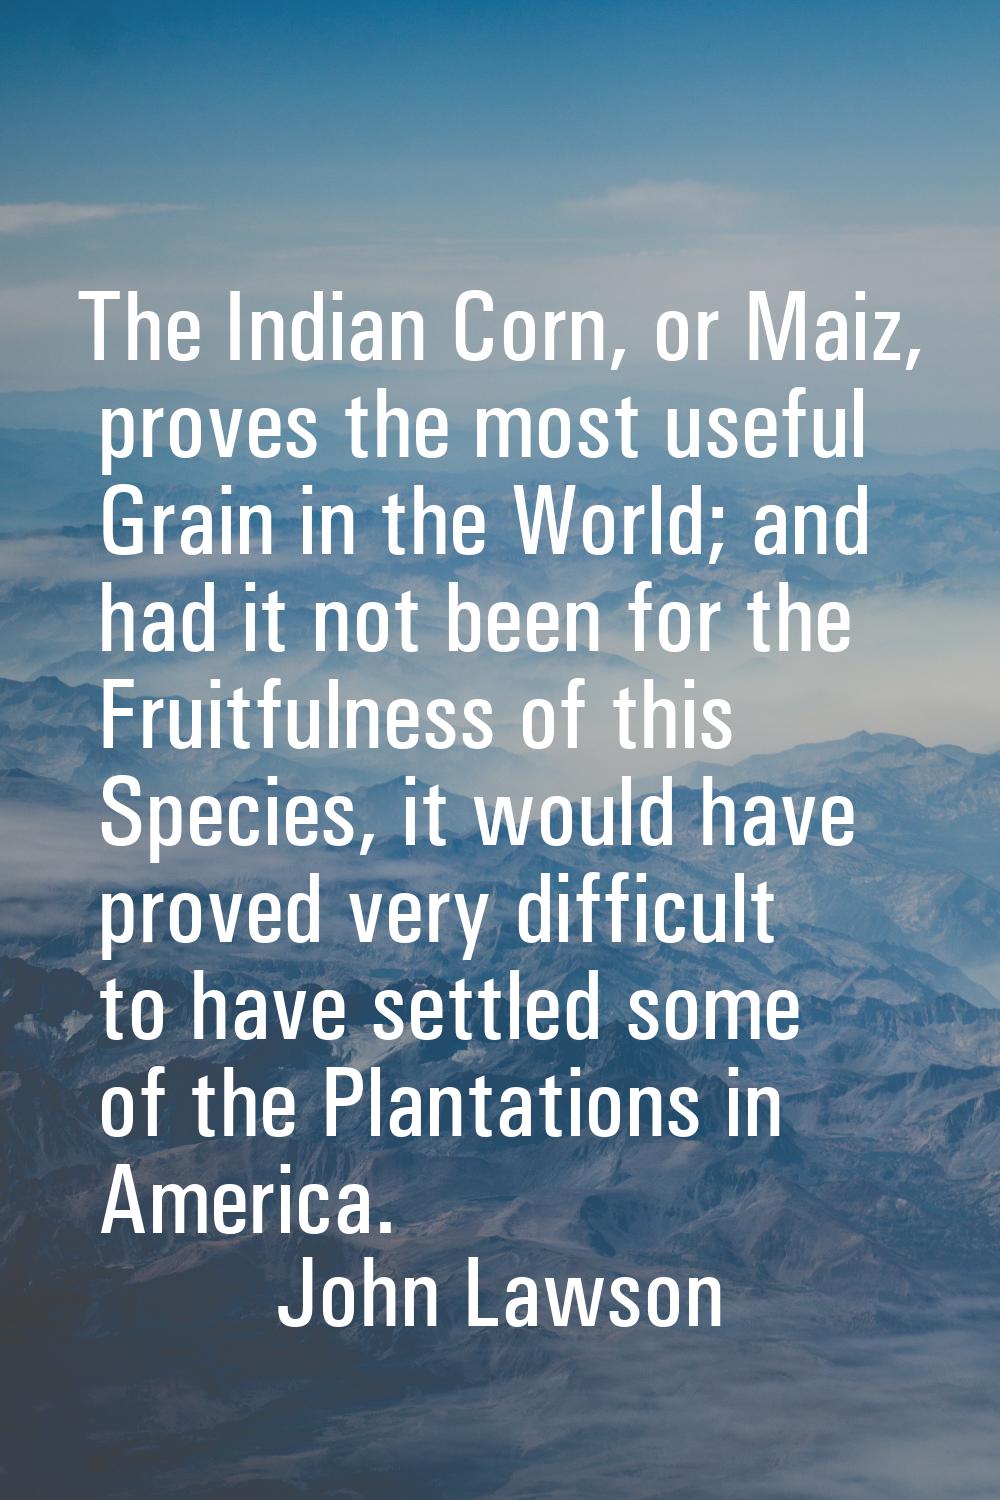 The Indian Corn, or Maiz, proves the most useful Grain in the World; and had it not been for the Fr